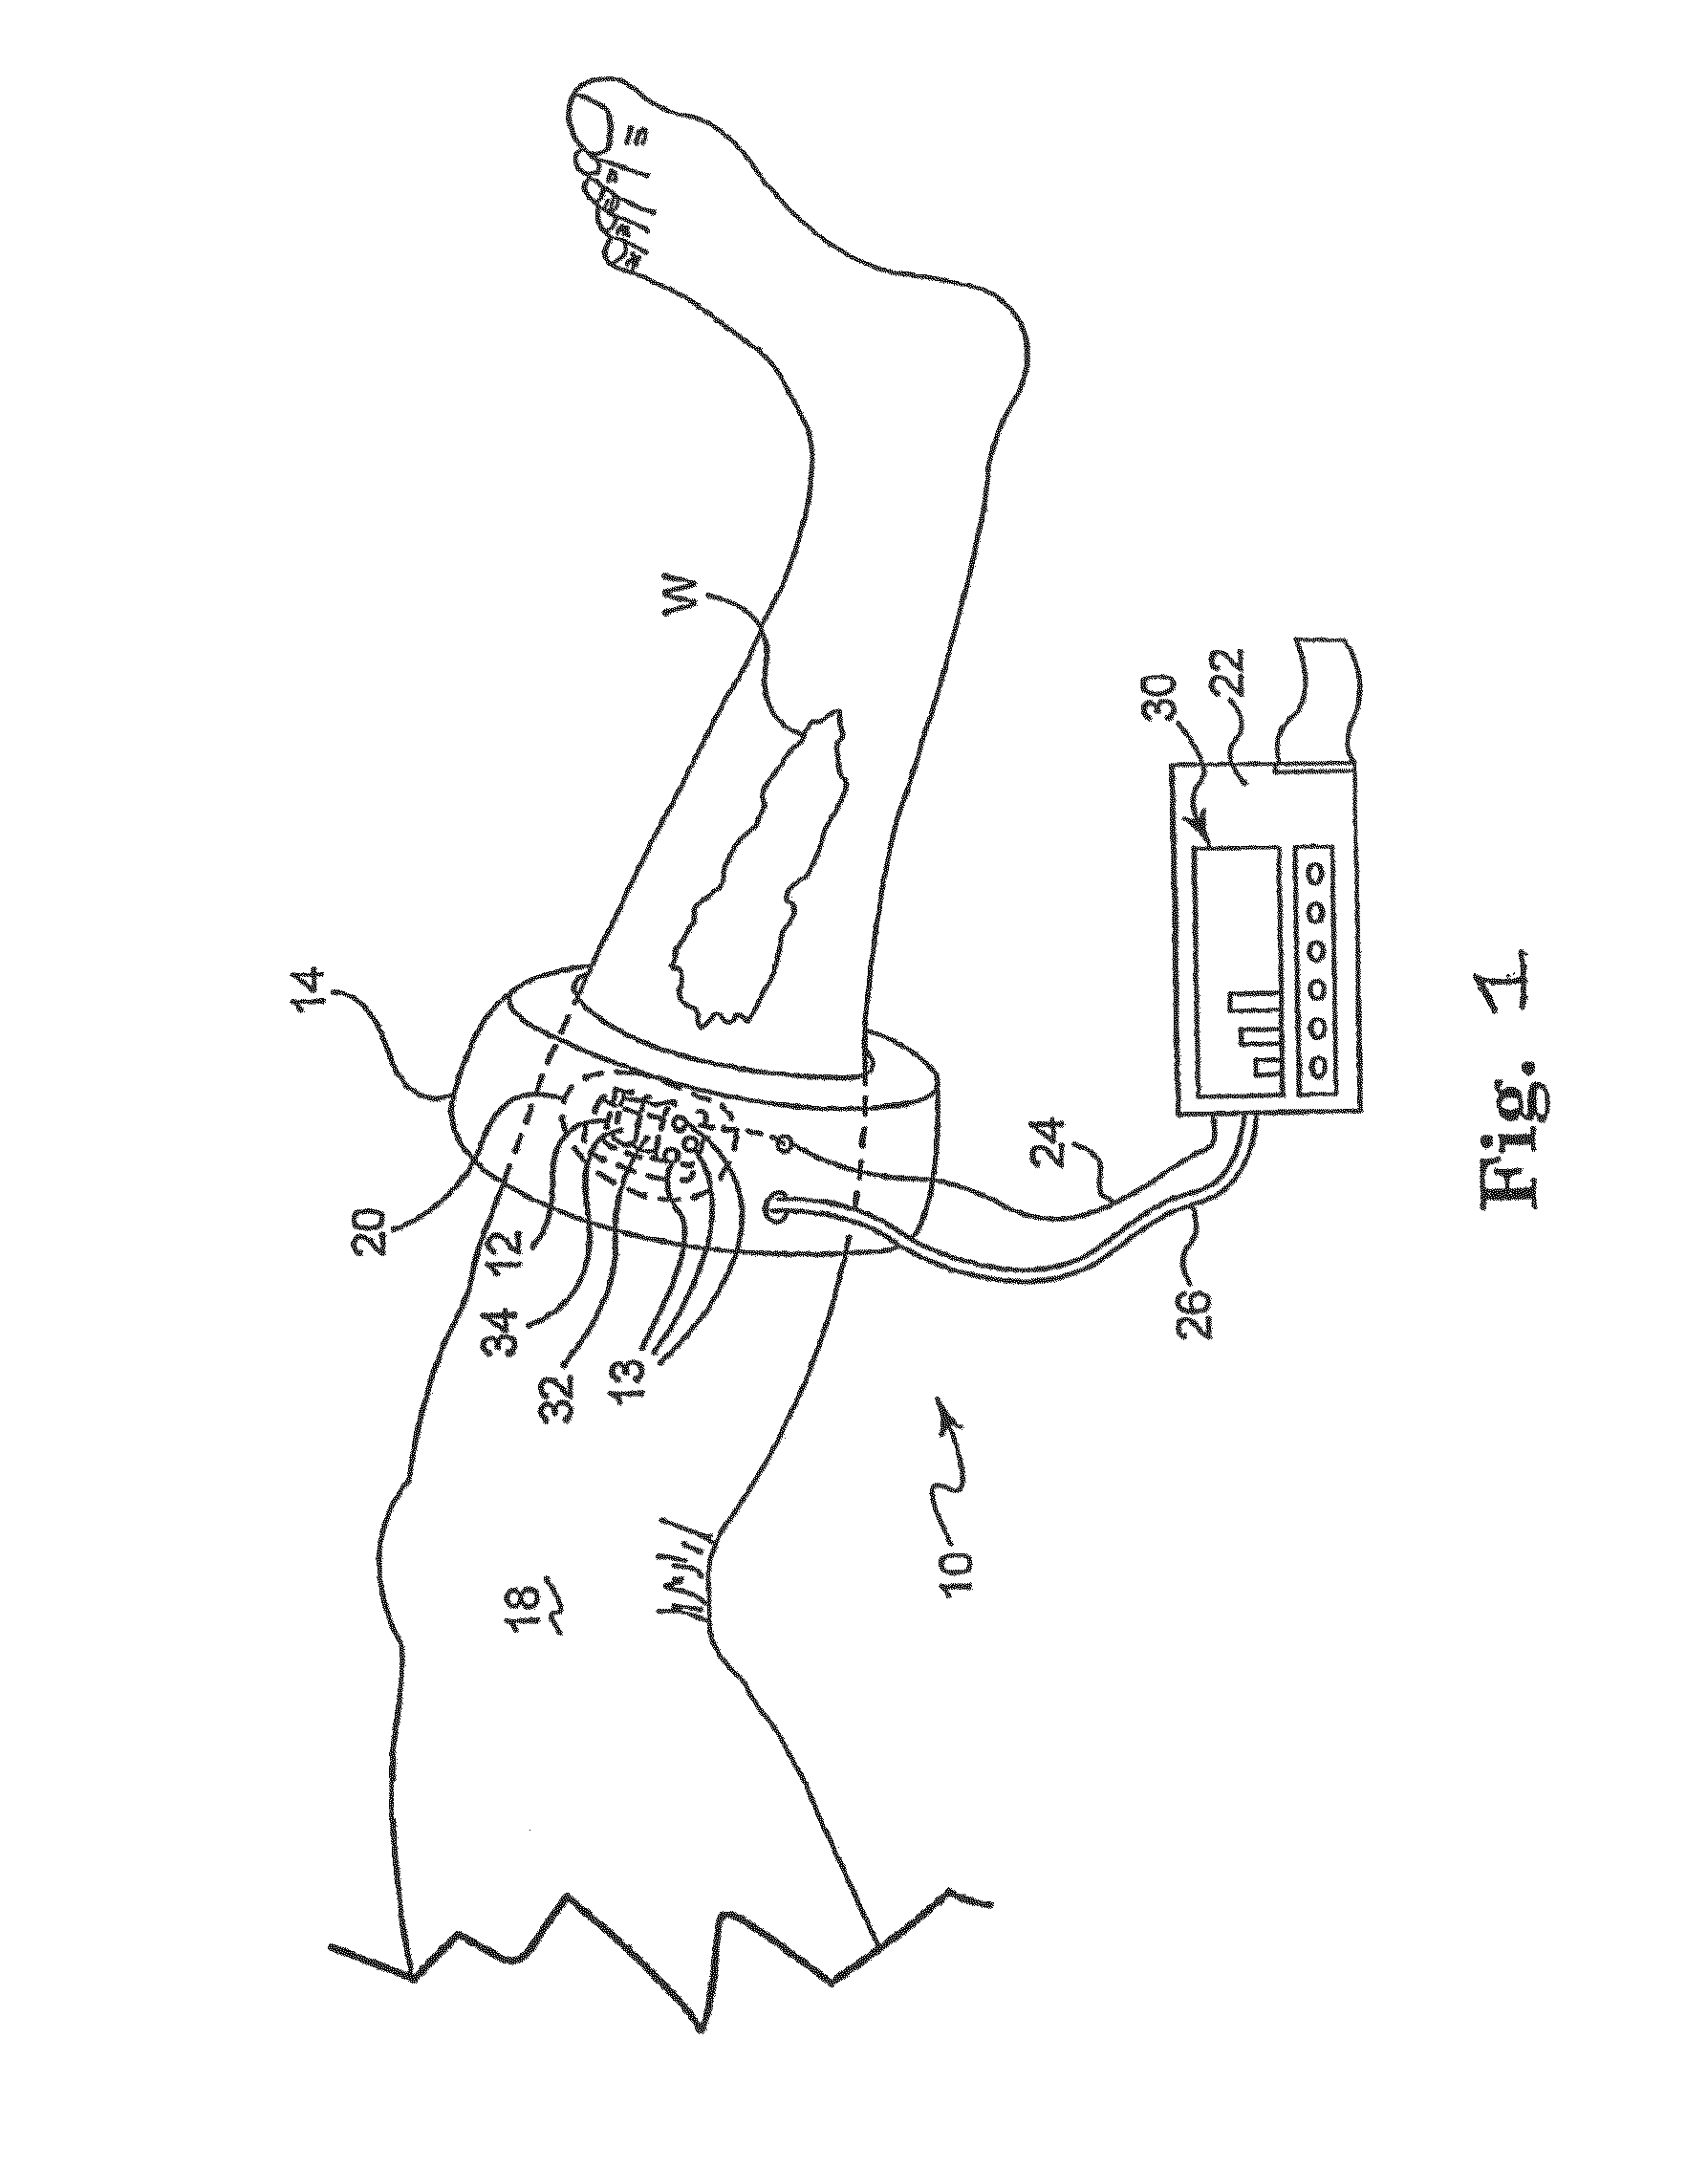 Method and system for assessing severity and stage of peripheral arterial disease and lower extremity wounds using angiosome mapping